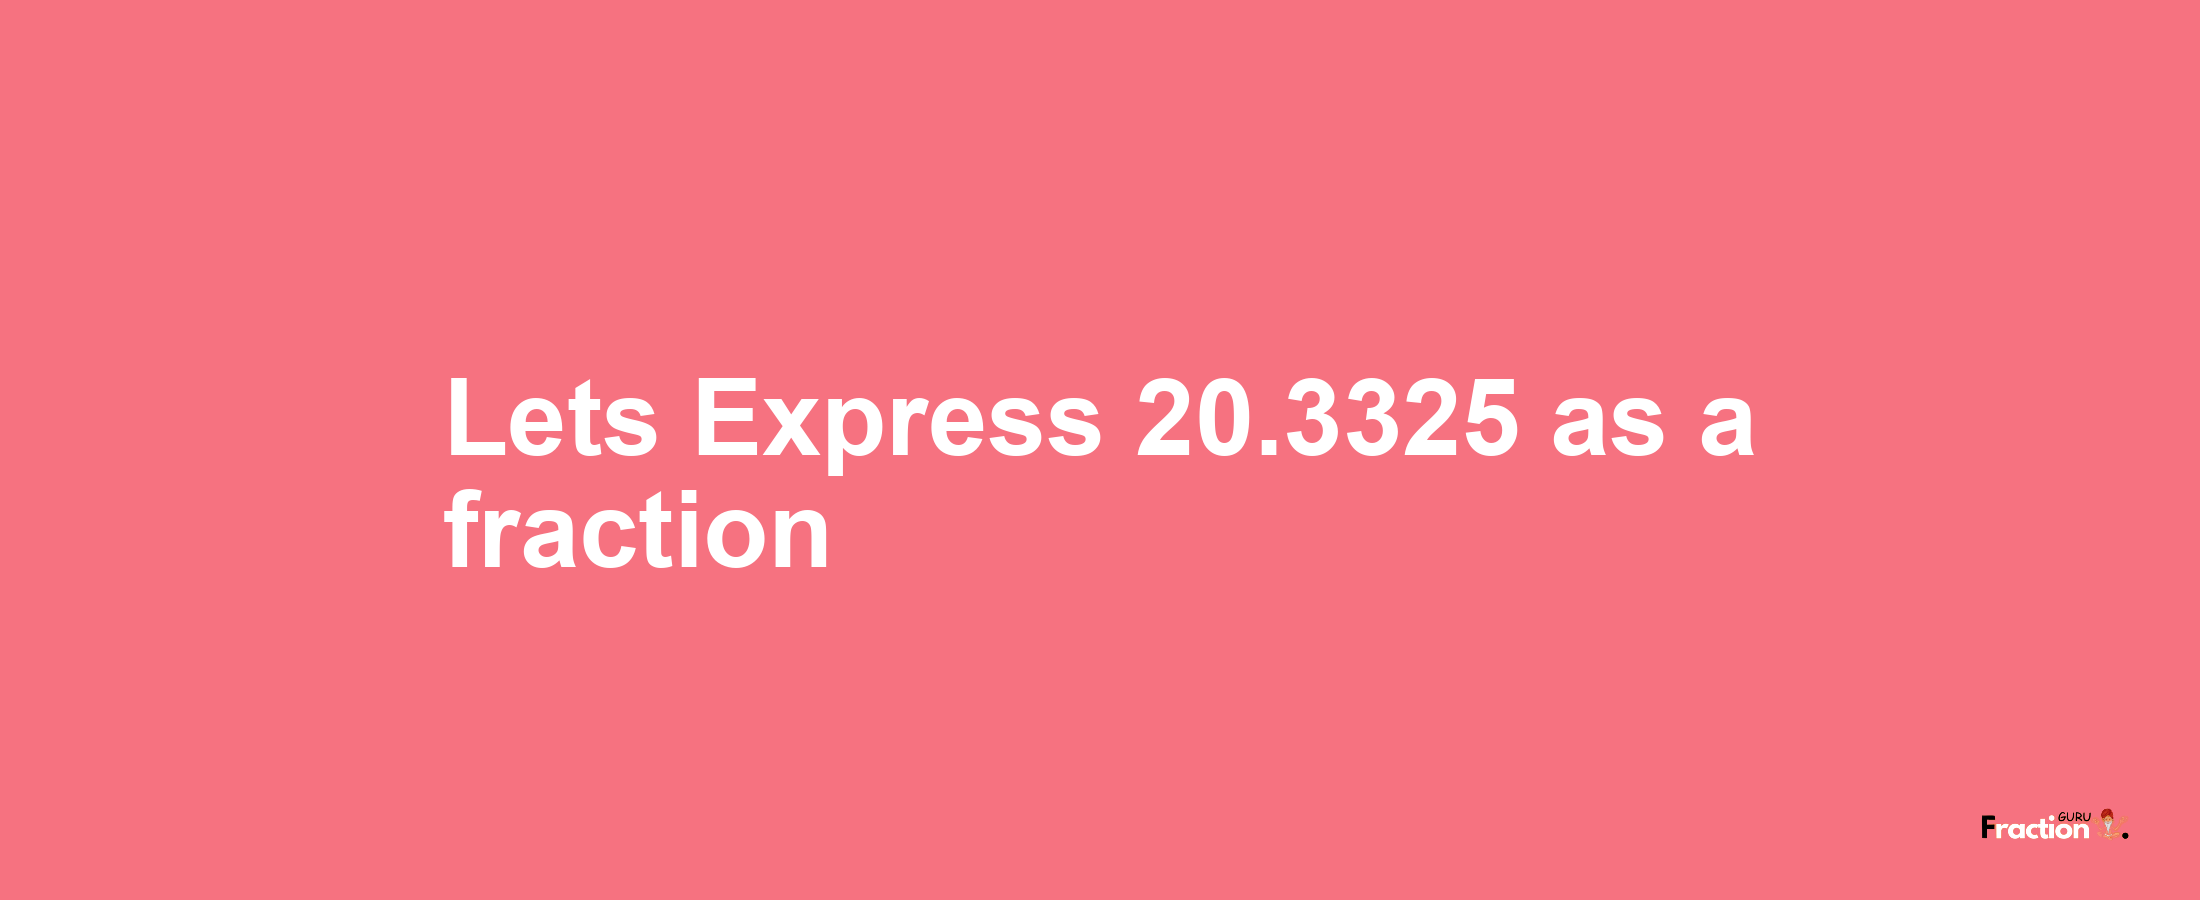 Lets Express 20.3325 as afraction